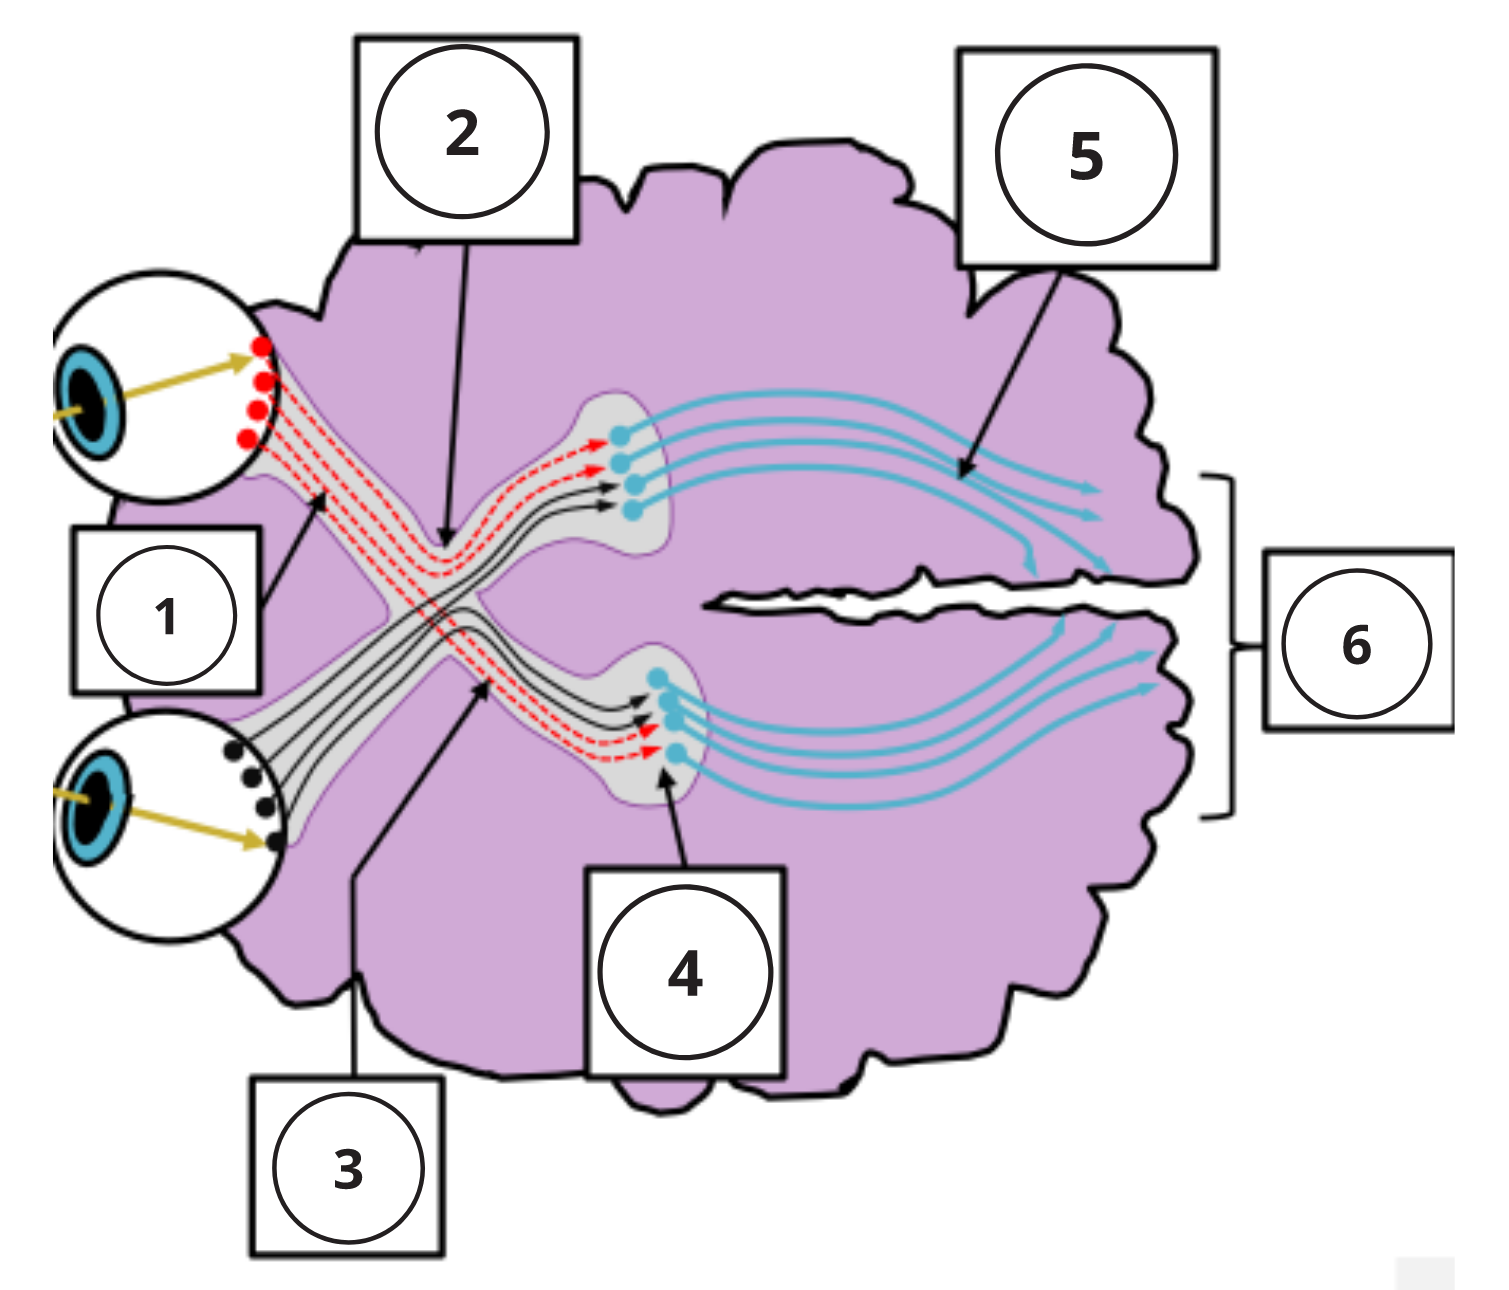 Number 1: A collection of neurons travelling from the back of the eye towards the LGN. Number 2: the point where the optic nerves from each eye cross. Number 3: the signals travelling to the left LGN distal to the crossing of the optic nerves. Number 4: the structure that receives signals from the left side of both retinae. Number 5: neurons travelling to this location to first be perceived. Number 6: the lobe of brain that is the most posterior and processes visual information.